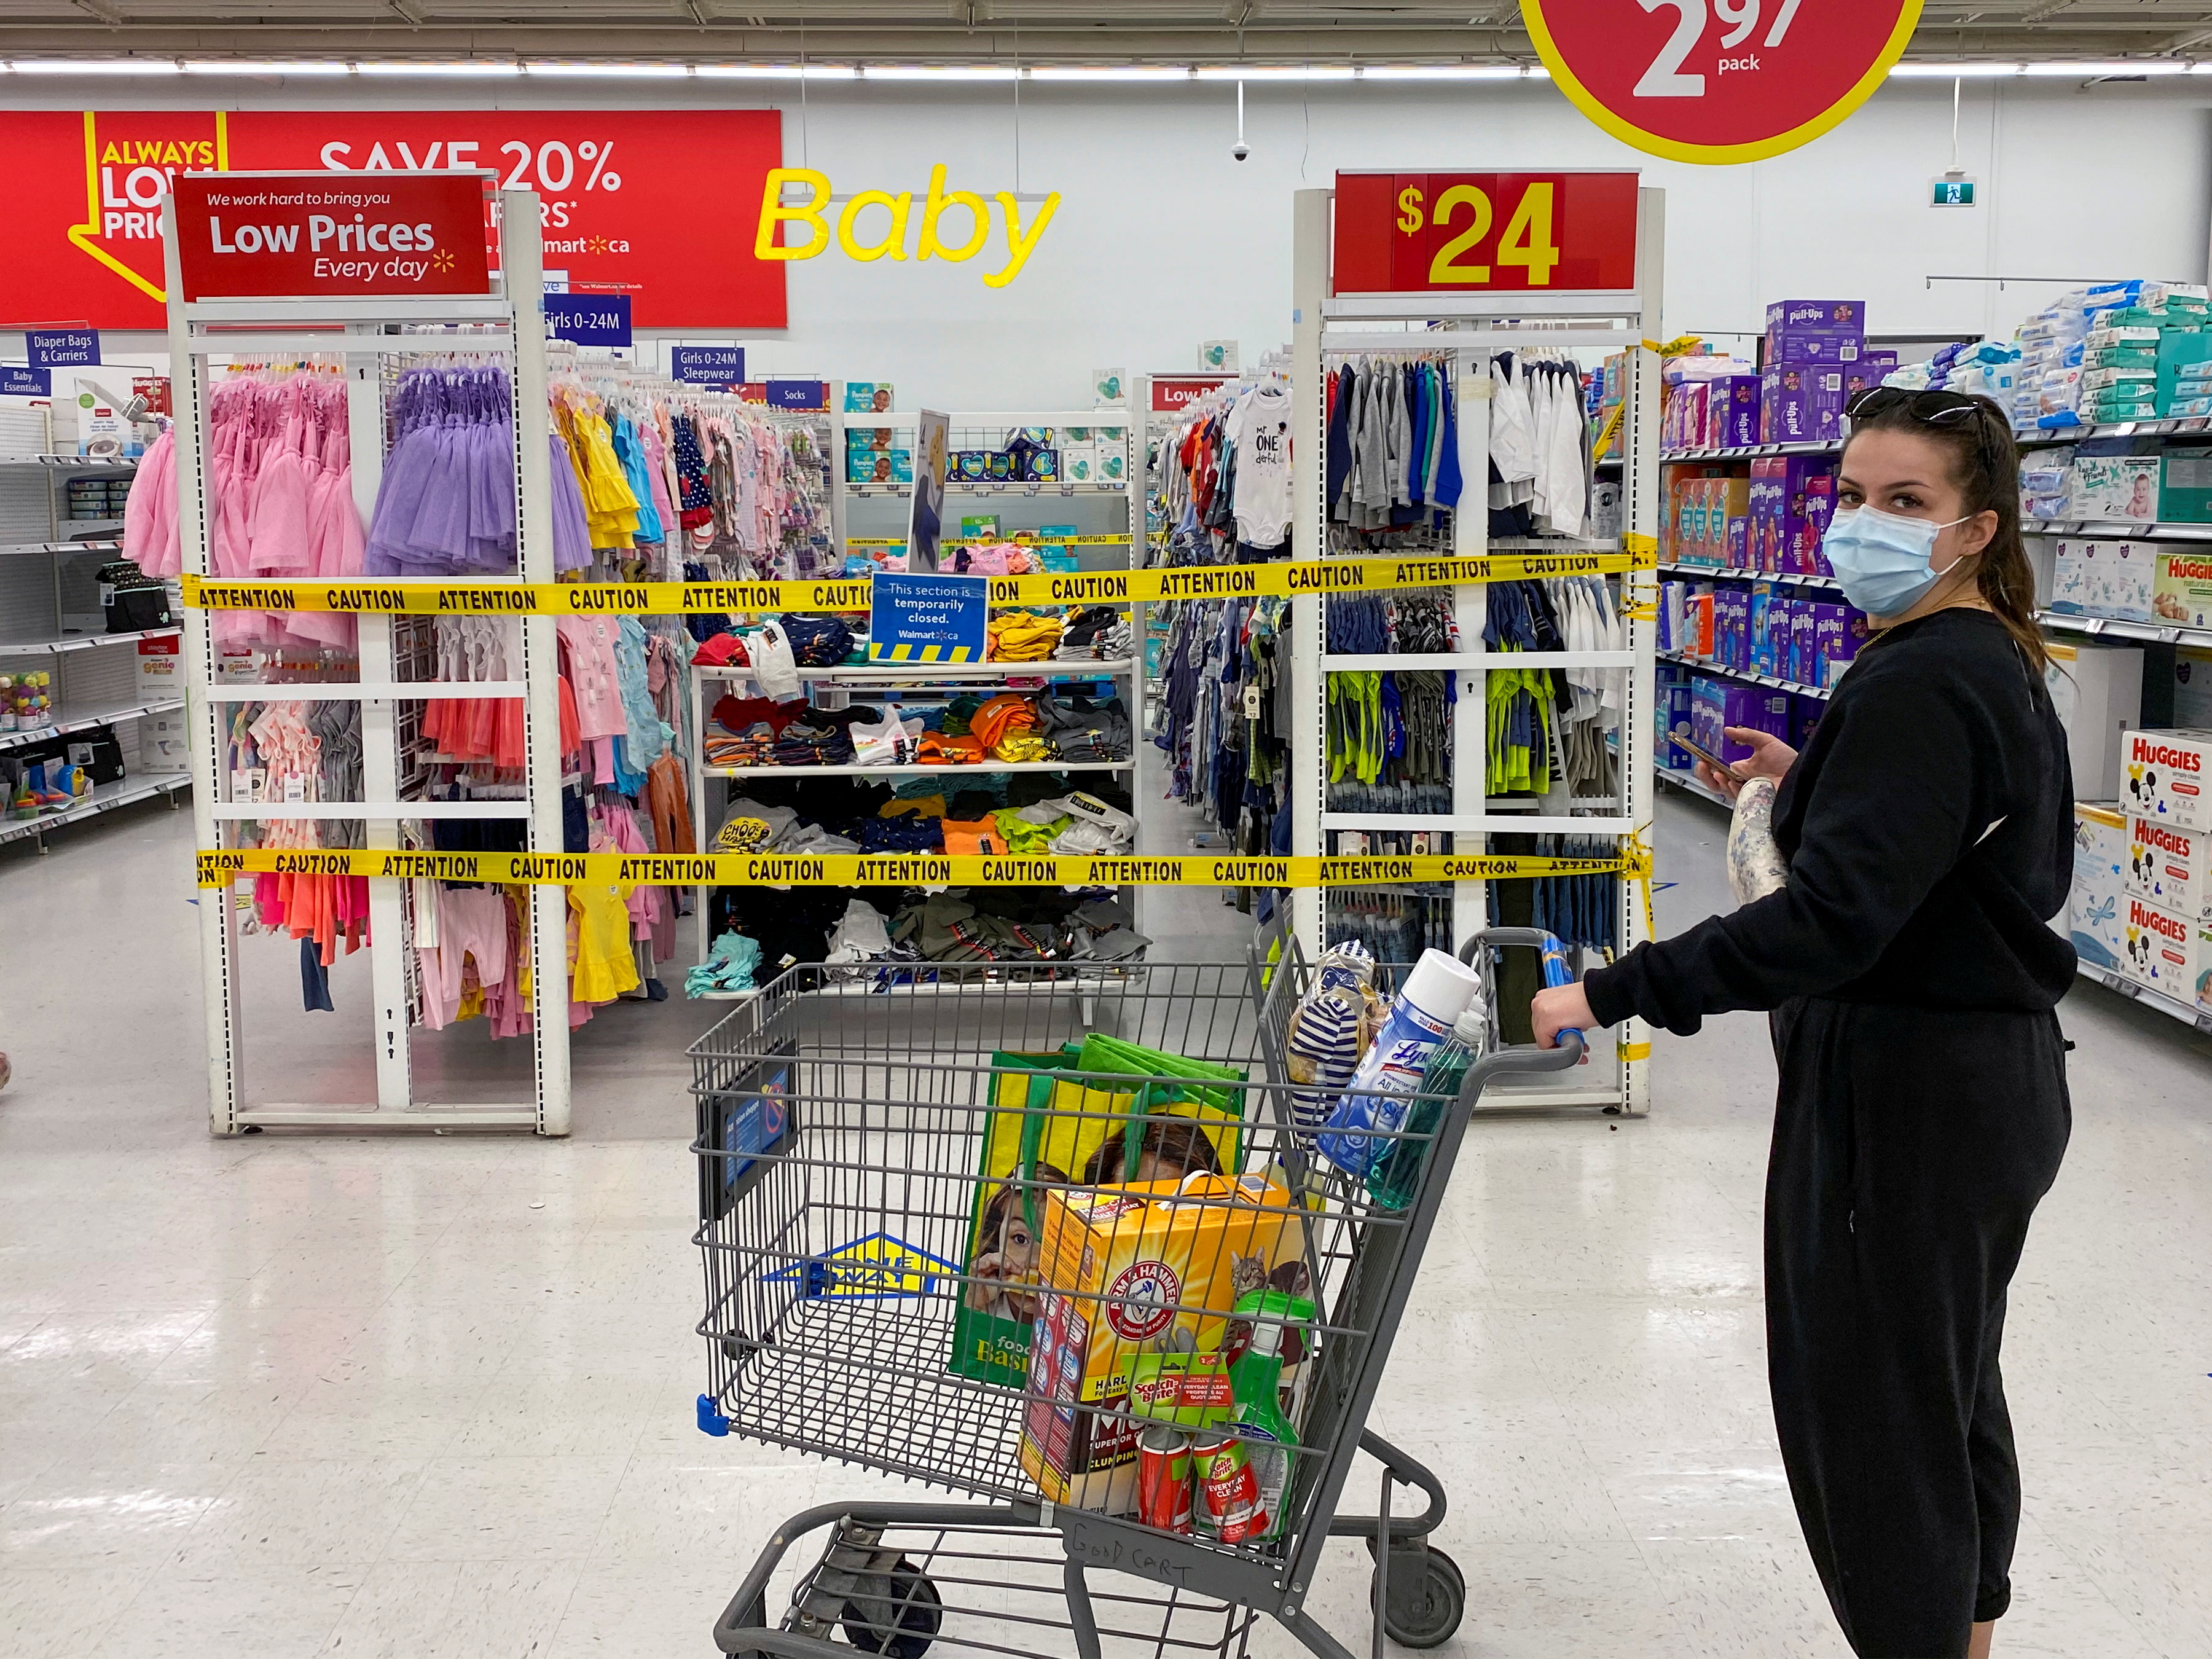 New measures imposed on big box stores amid COVID-19 pandemic, in Toronto